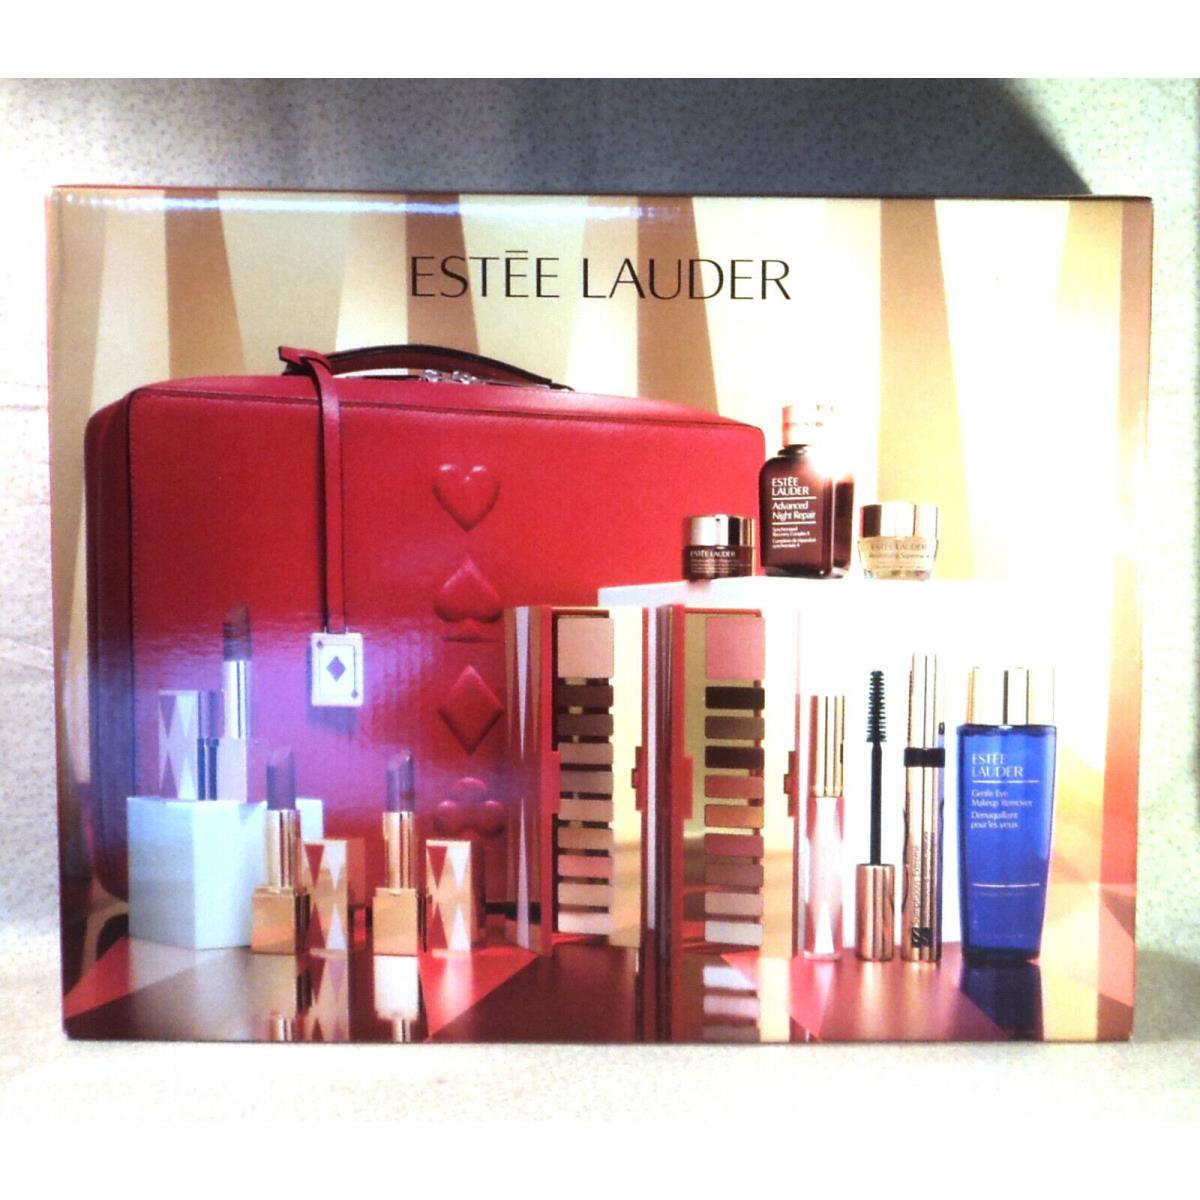 Estee Lauder Nudes Glam 12 Piece Makeup Kit with Travel Case - Boxed